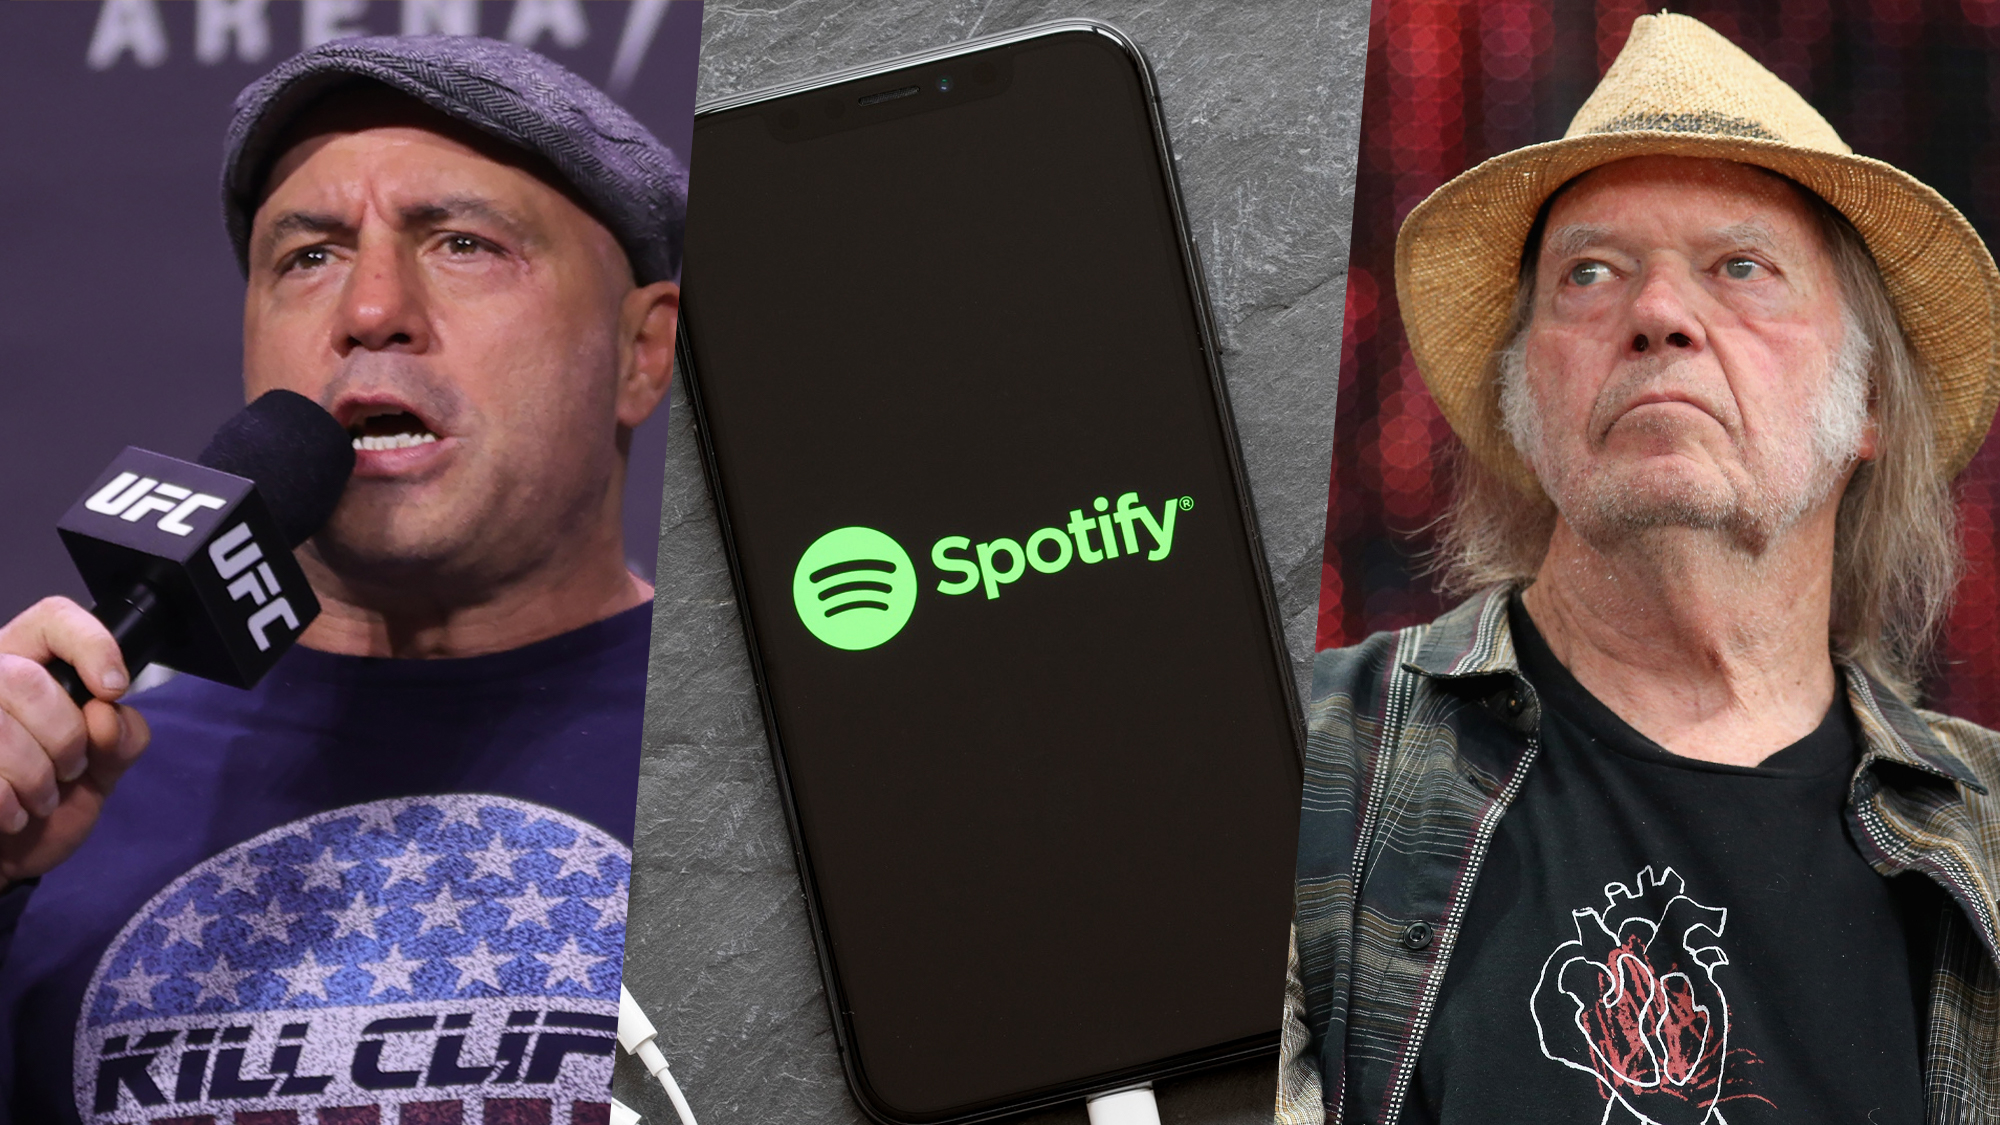 Joe Rogan speaking on a microphone, Spotify on the phone and Neil Young on a show